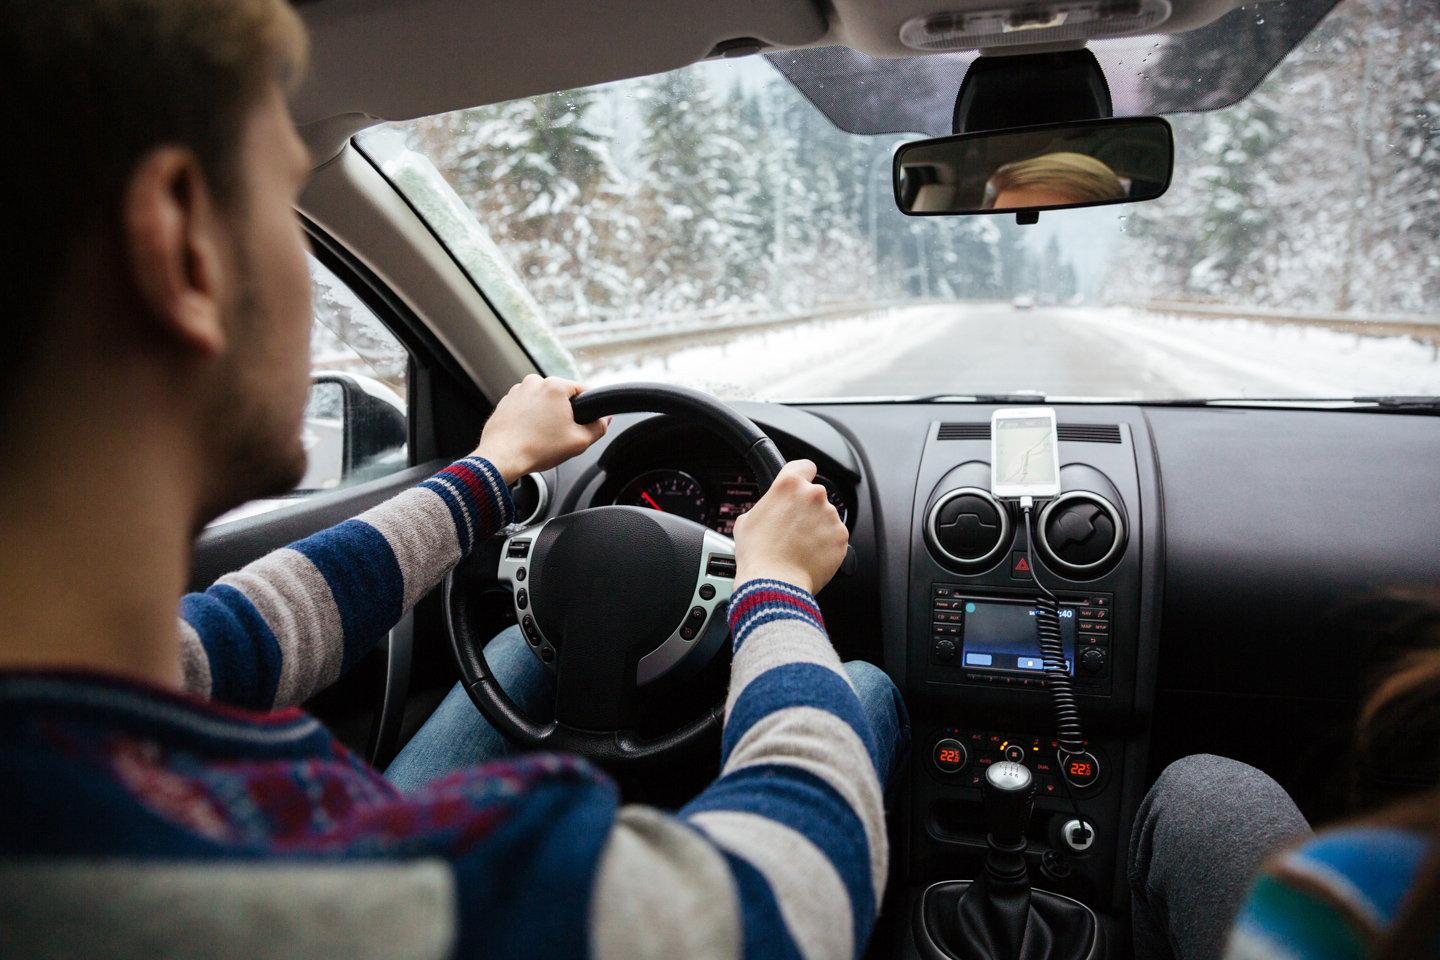 Get Ready for Winter - Top Tips for Safer Driving in Germany During the Winter Months